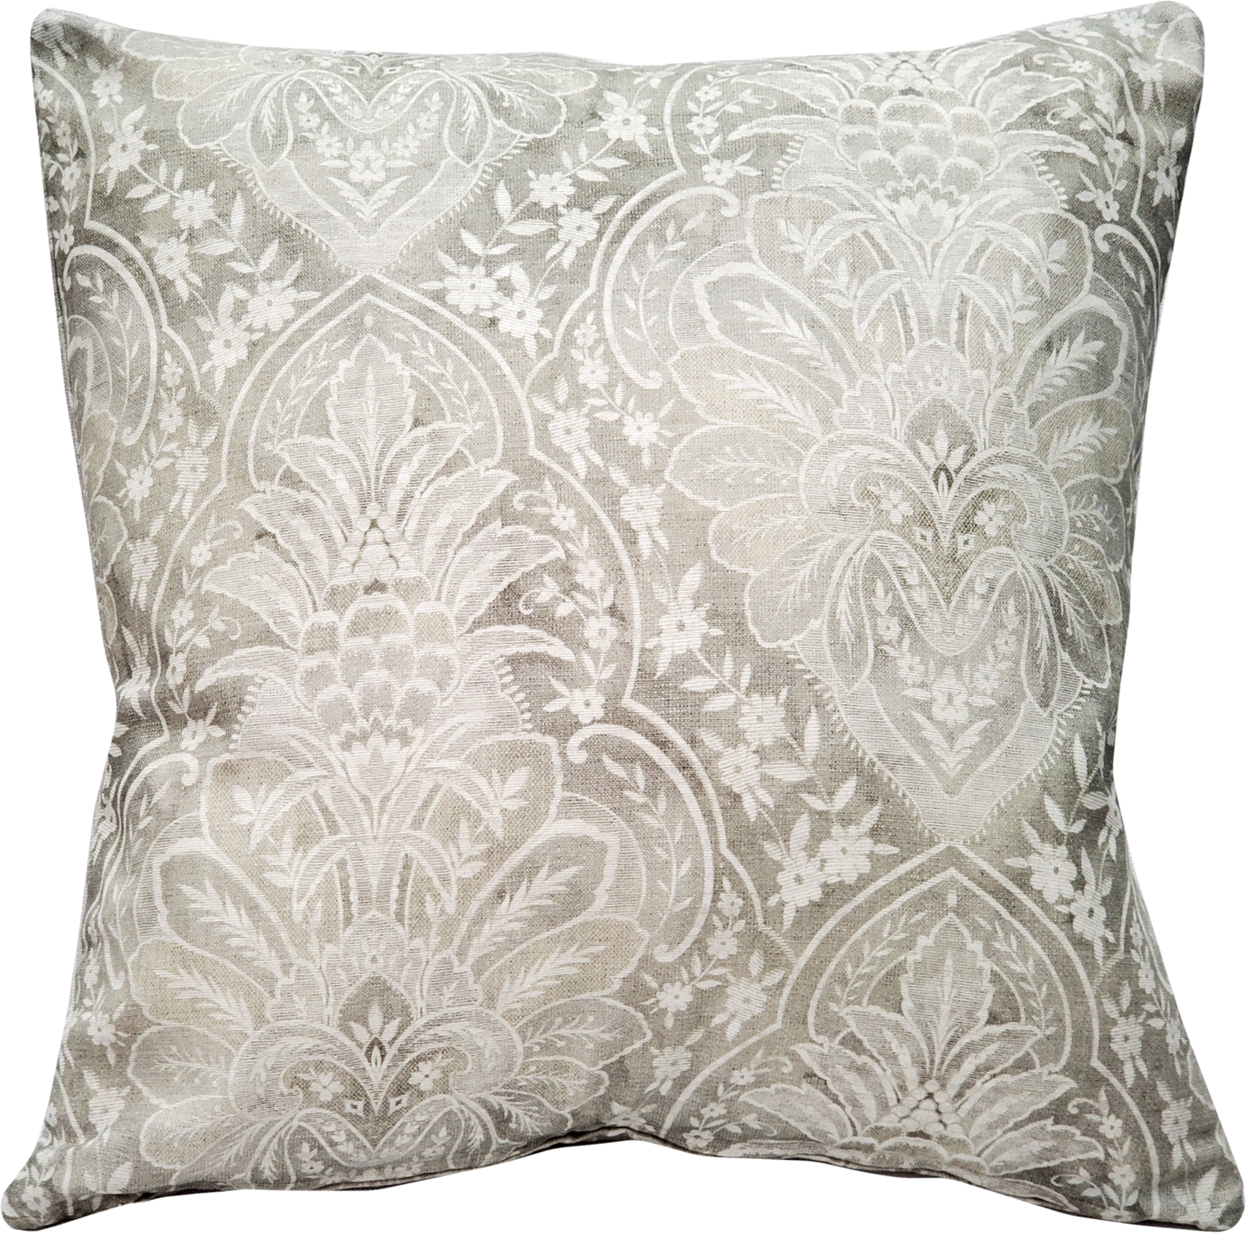 Leone Damask Cloud Gray Throw Pillow 21x21 Inches Square, Complete Pillow With Polyfill Pillow Insert